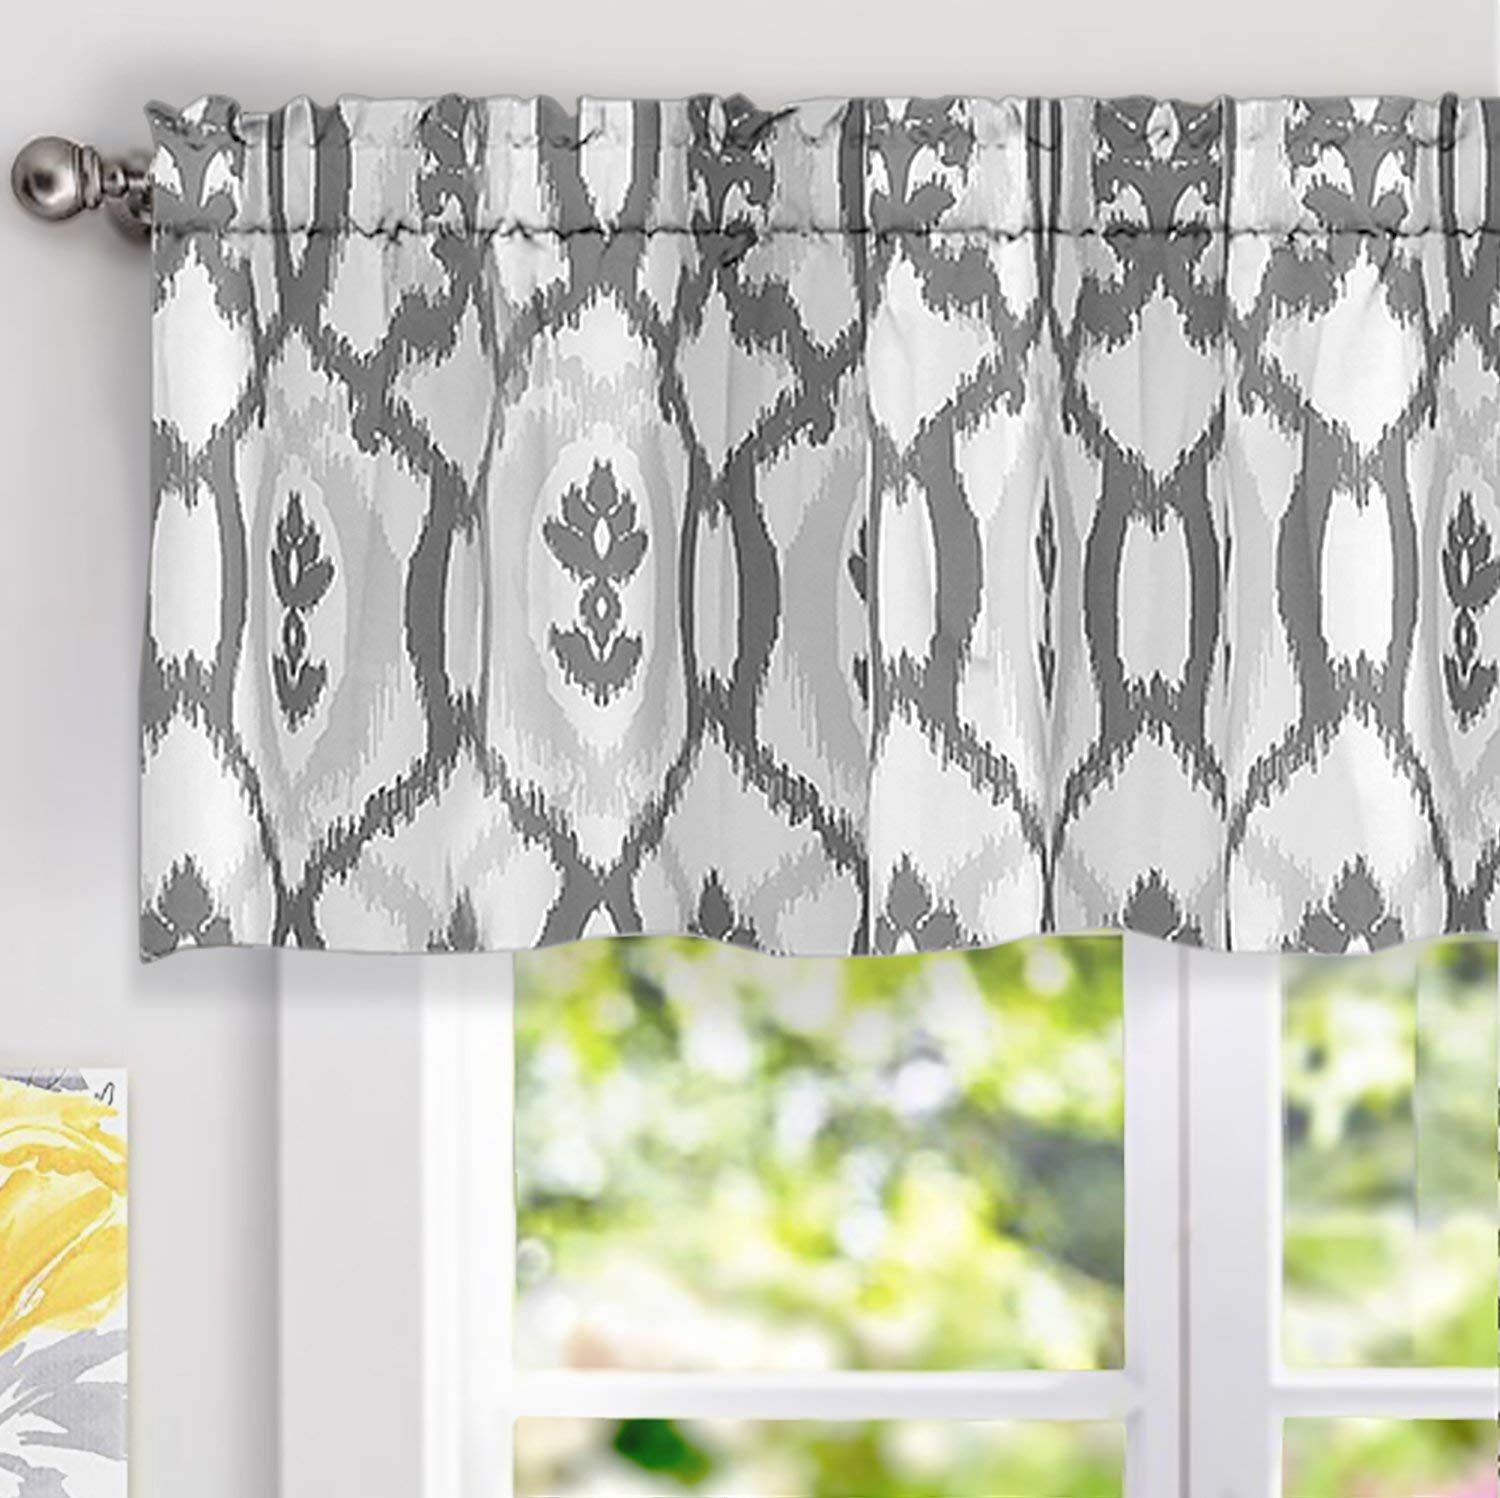 Driftaway Evelyn Ikat Fleur/floral Pattern Window Curtain Valance Intended For Floral Pattern Window Valances (View 9 of 20)